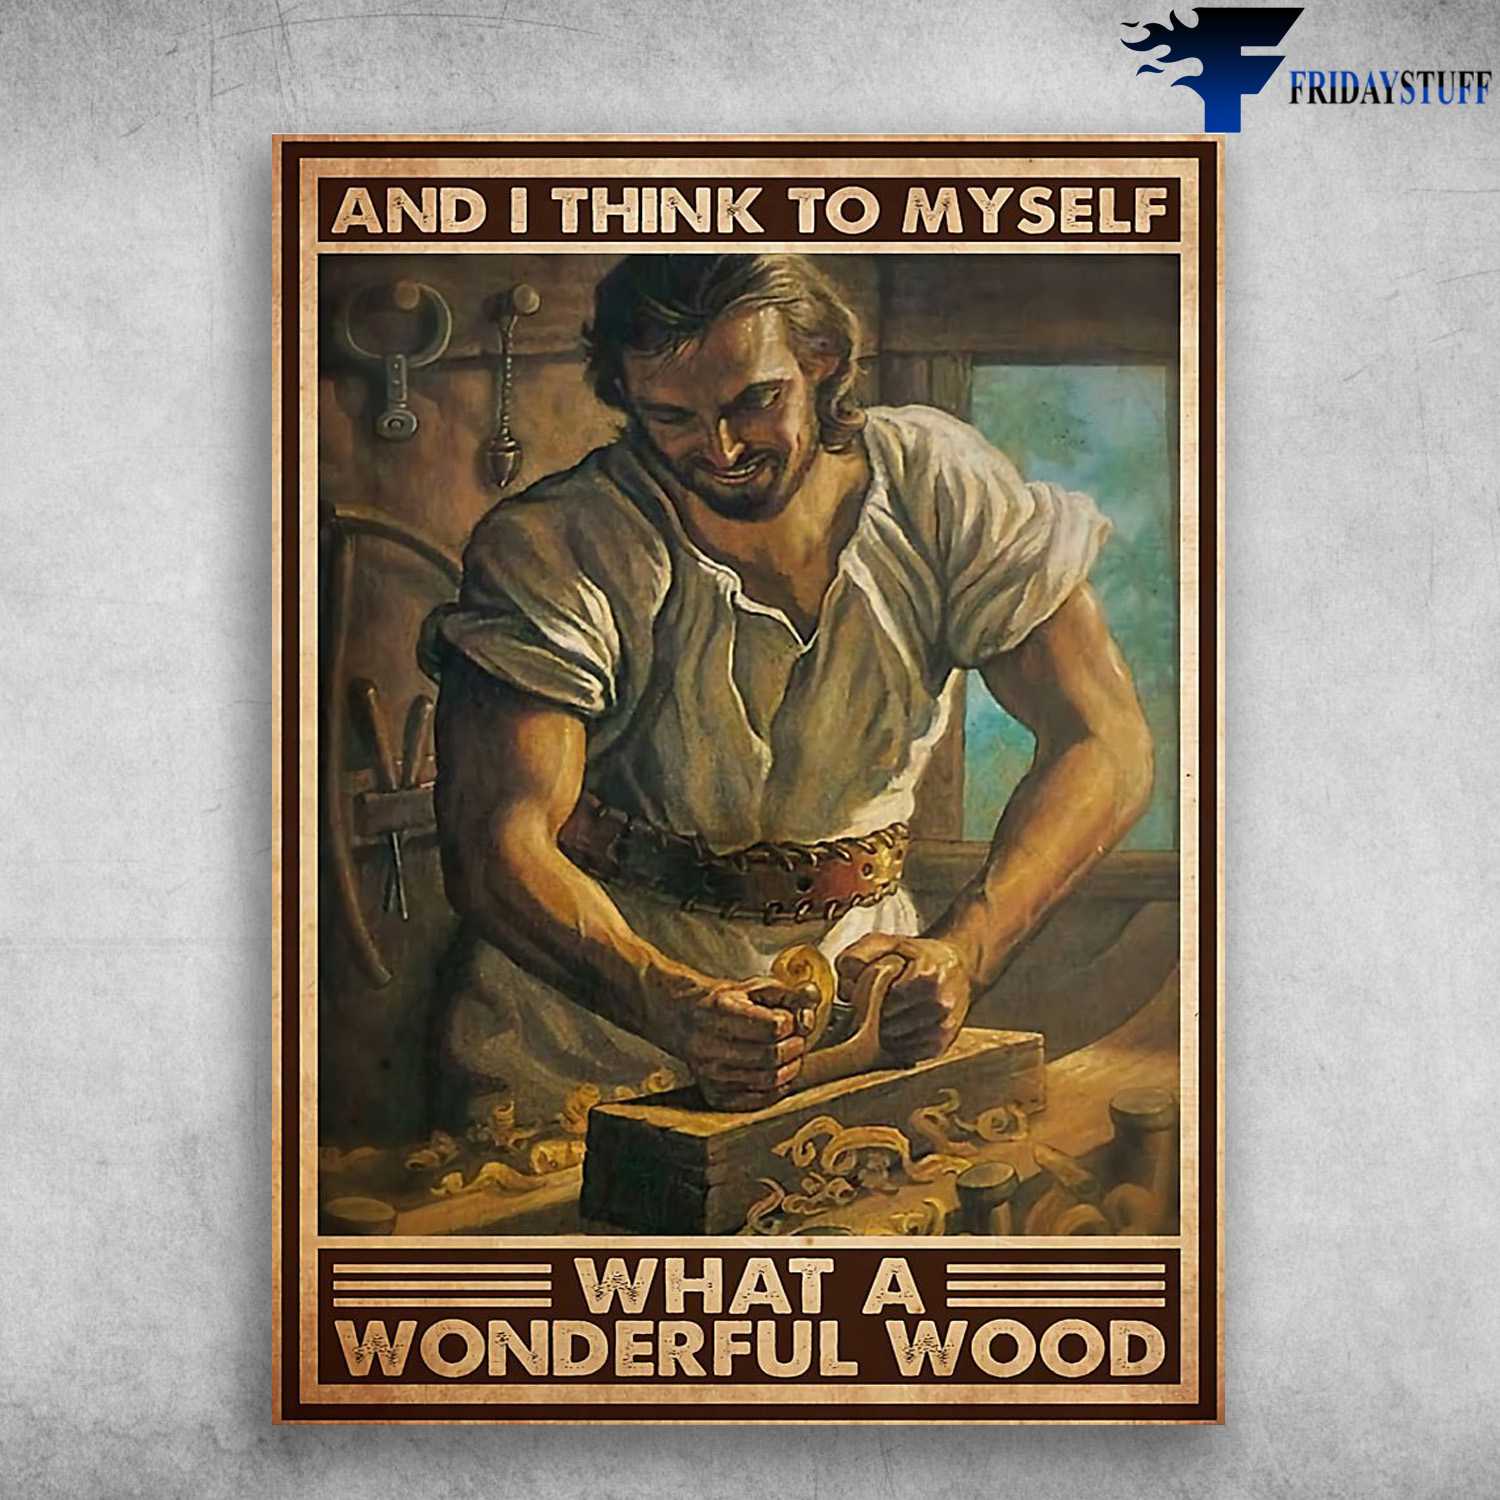 Carpenter Poster - And I Think To Myself, What A Wonderful Wood